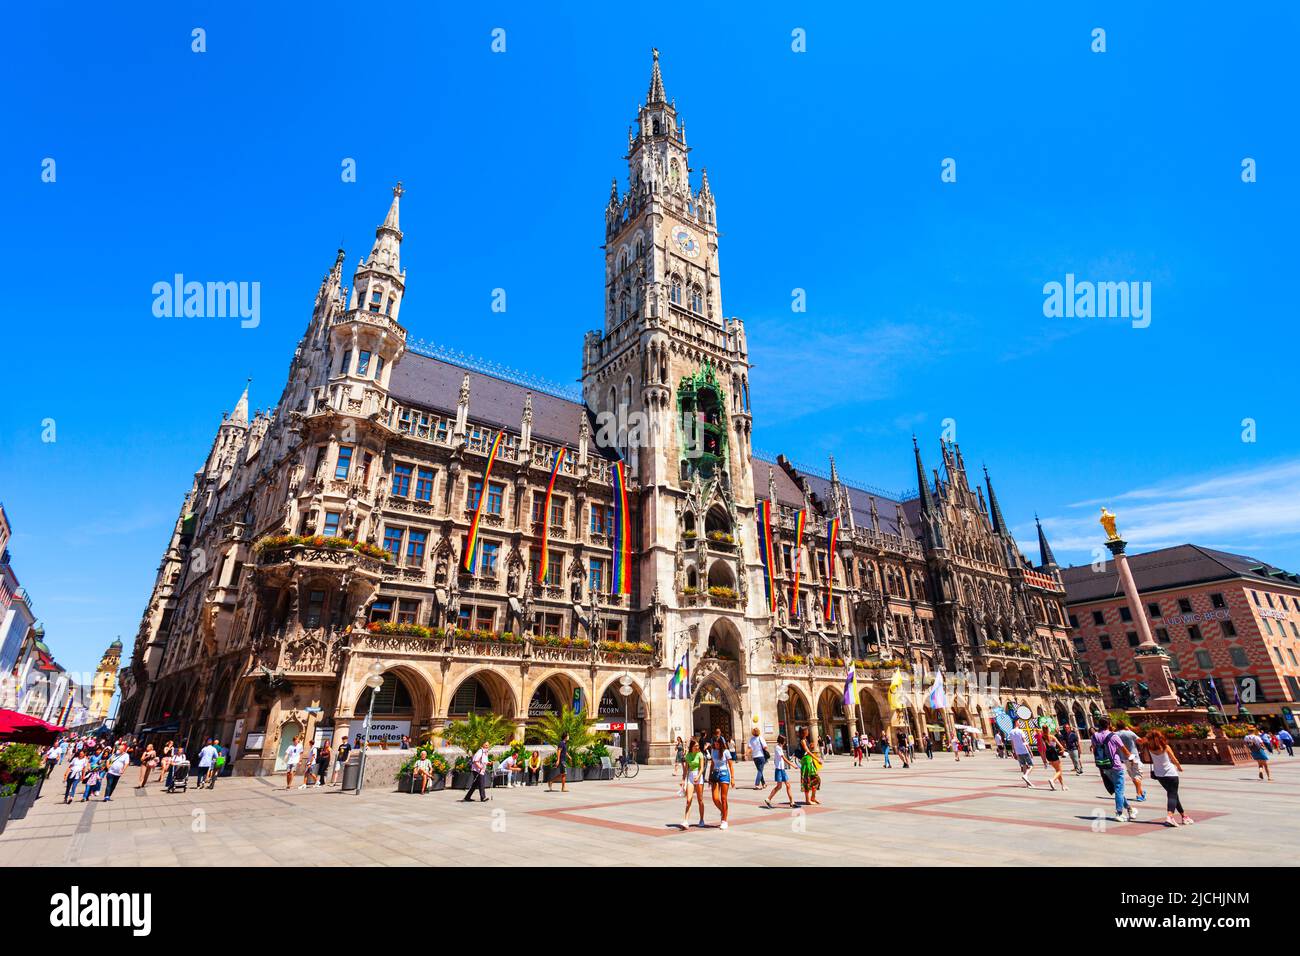 Munich, Germany - July 06, 2021: New Town Hall or Neues Rathaus is located at the Marienplatz or St. Mary square, a central square in Munich city cent Stock Photo